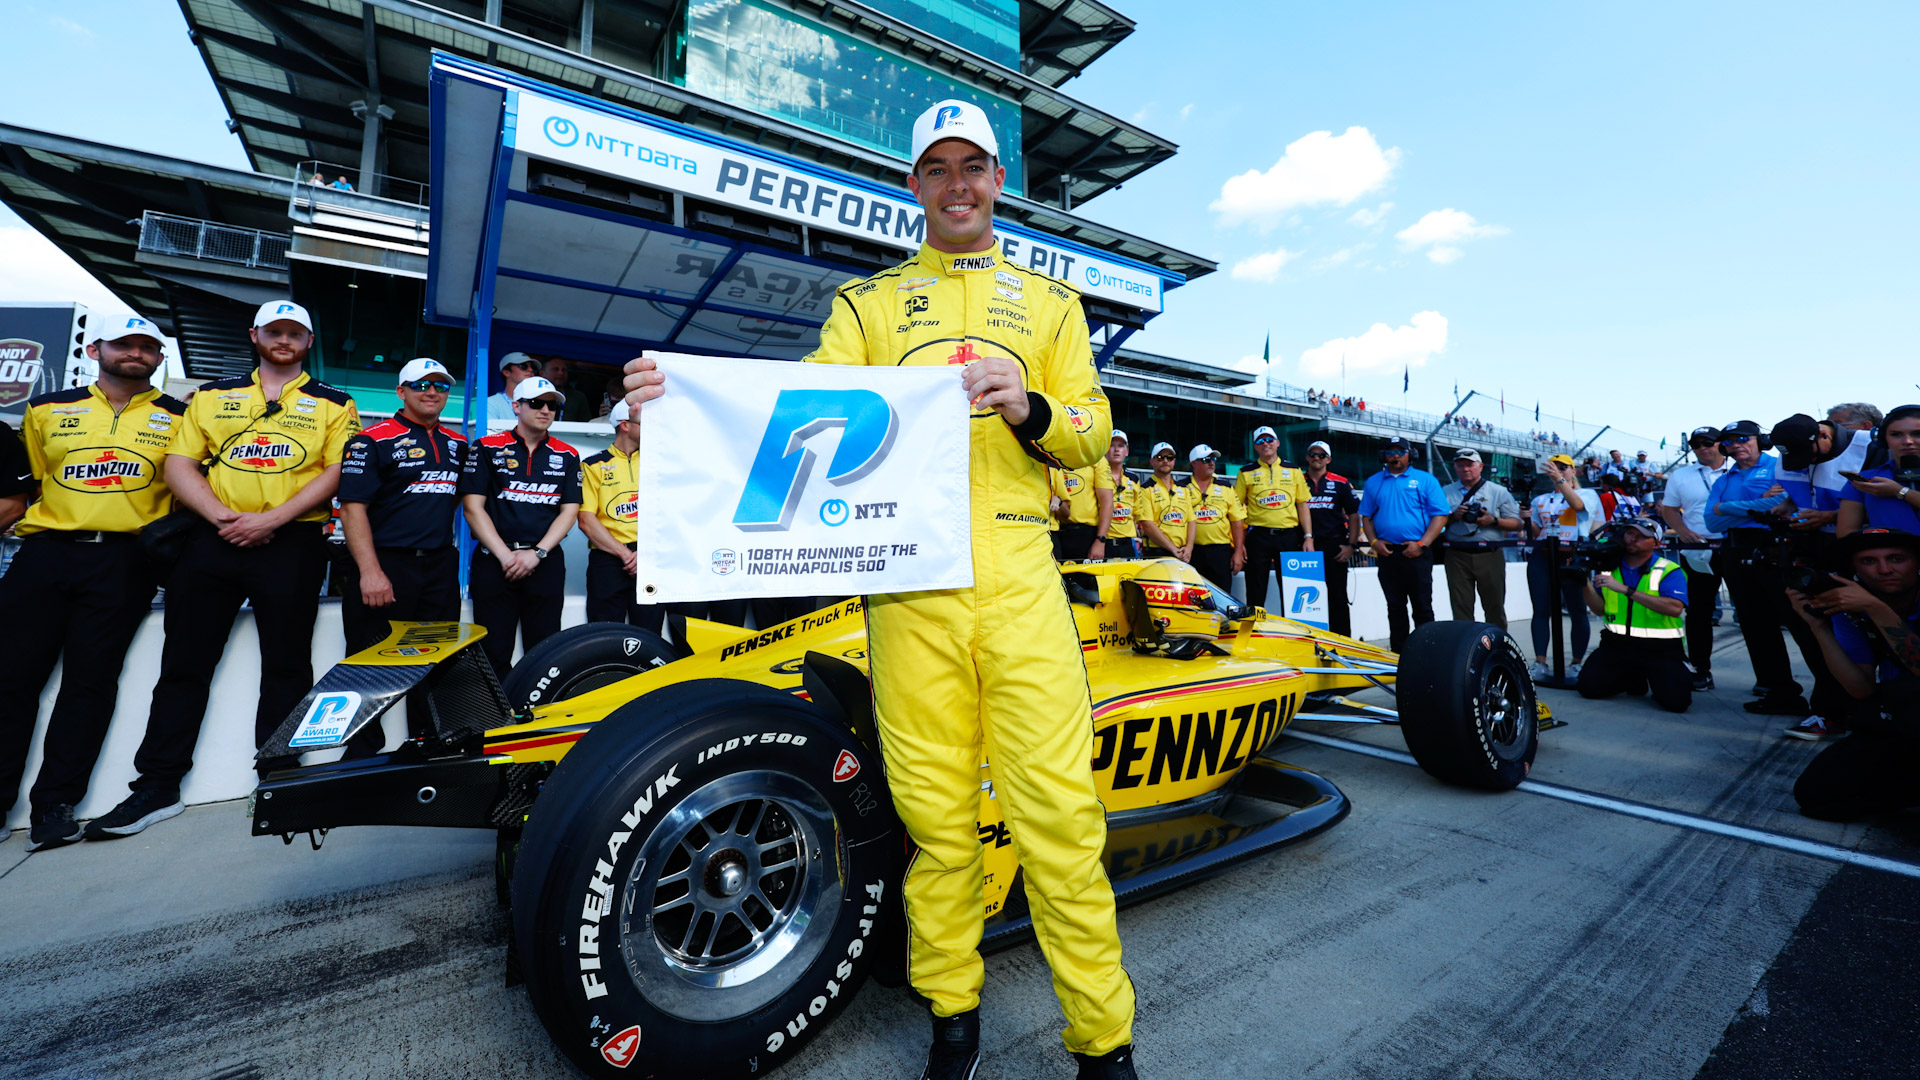 Scott McLaughlin shows the NTT pole Award in front of the #3 car on pit road at Indianapolis Motor Speedway 